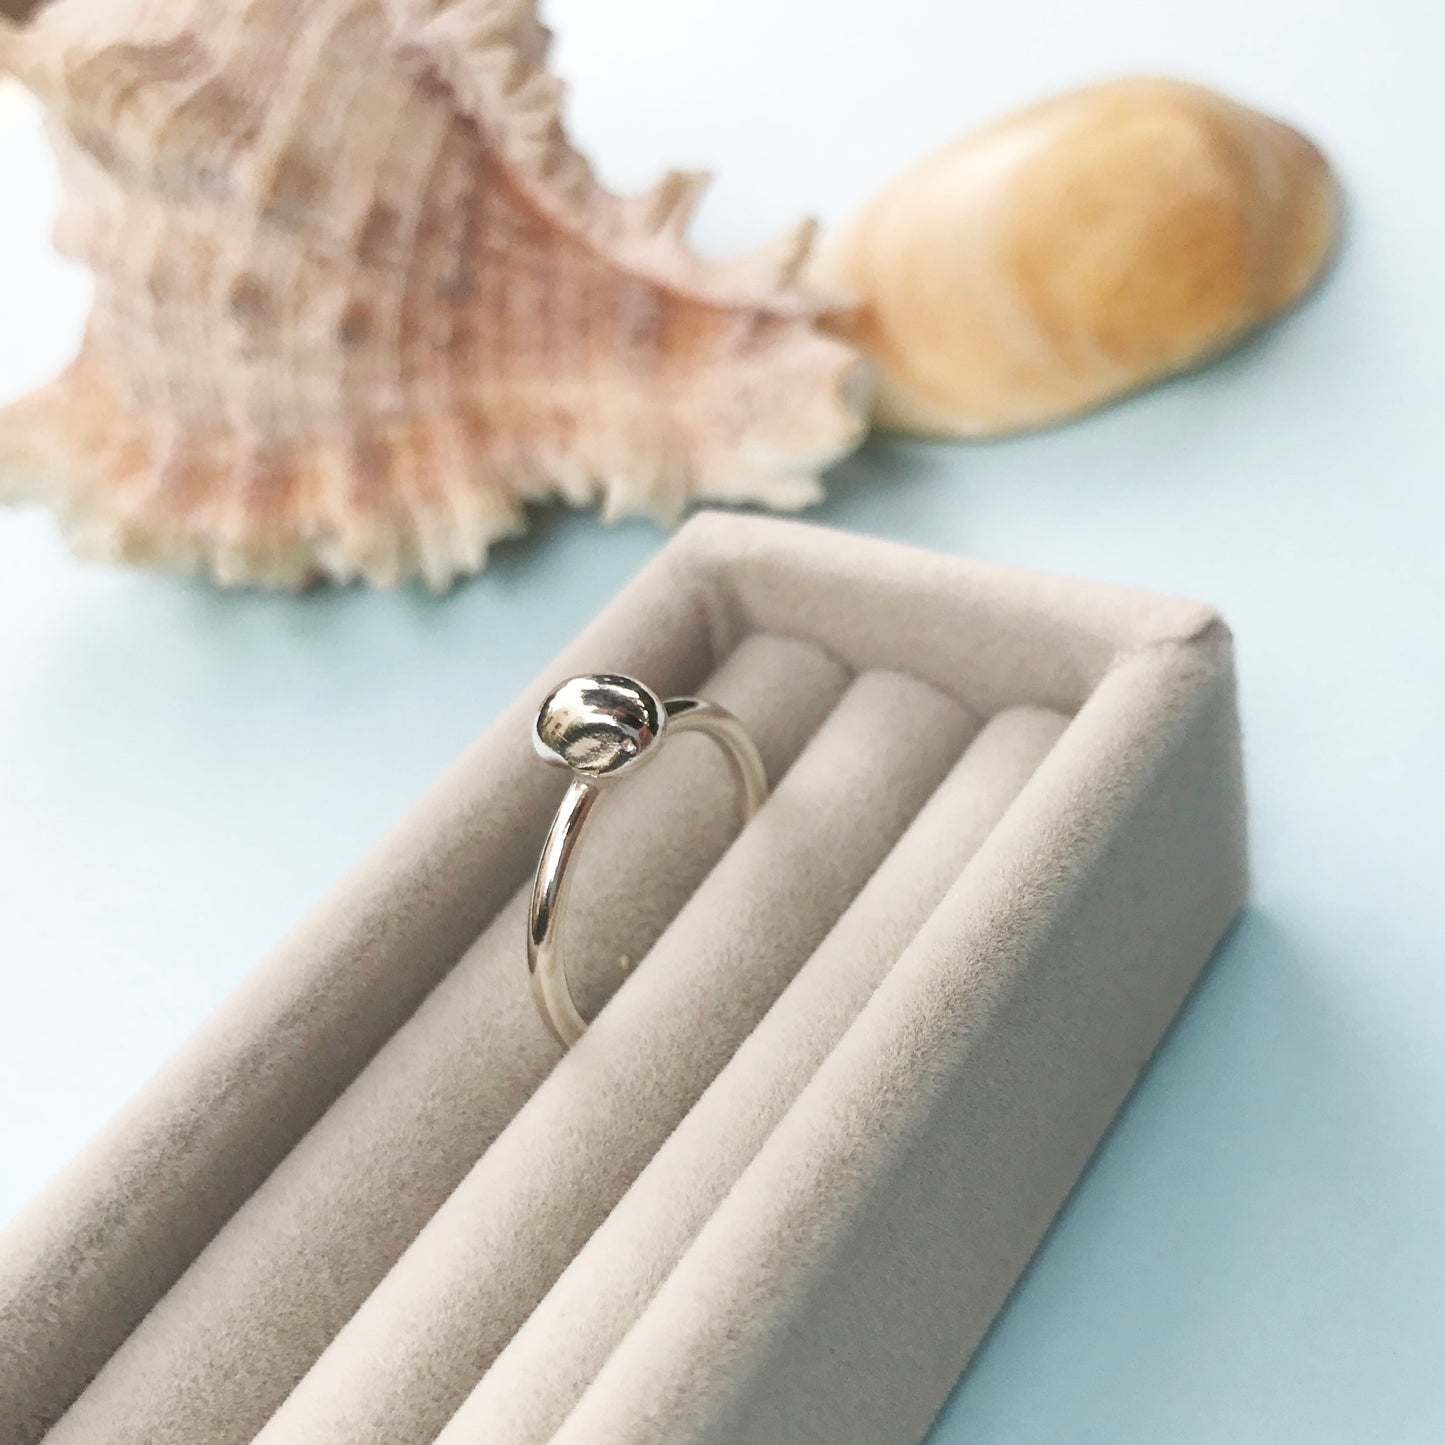 sterling silver pebble stacking rings, silver stacking rings, silver pebble rings, silver stacking pebble rings, polished pebble ring, matte silver pebble ring